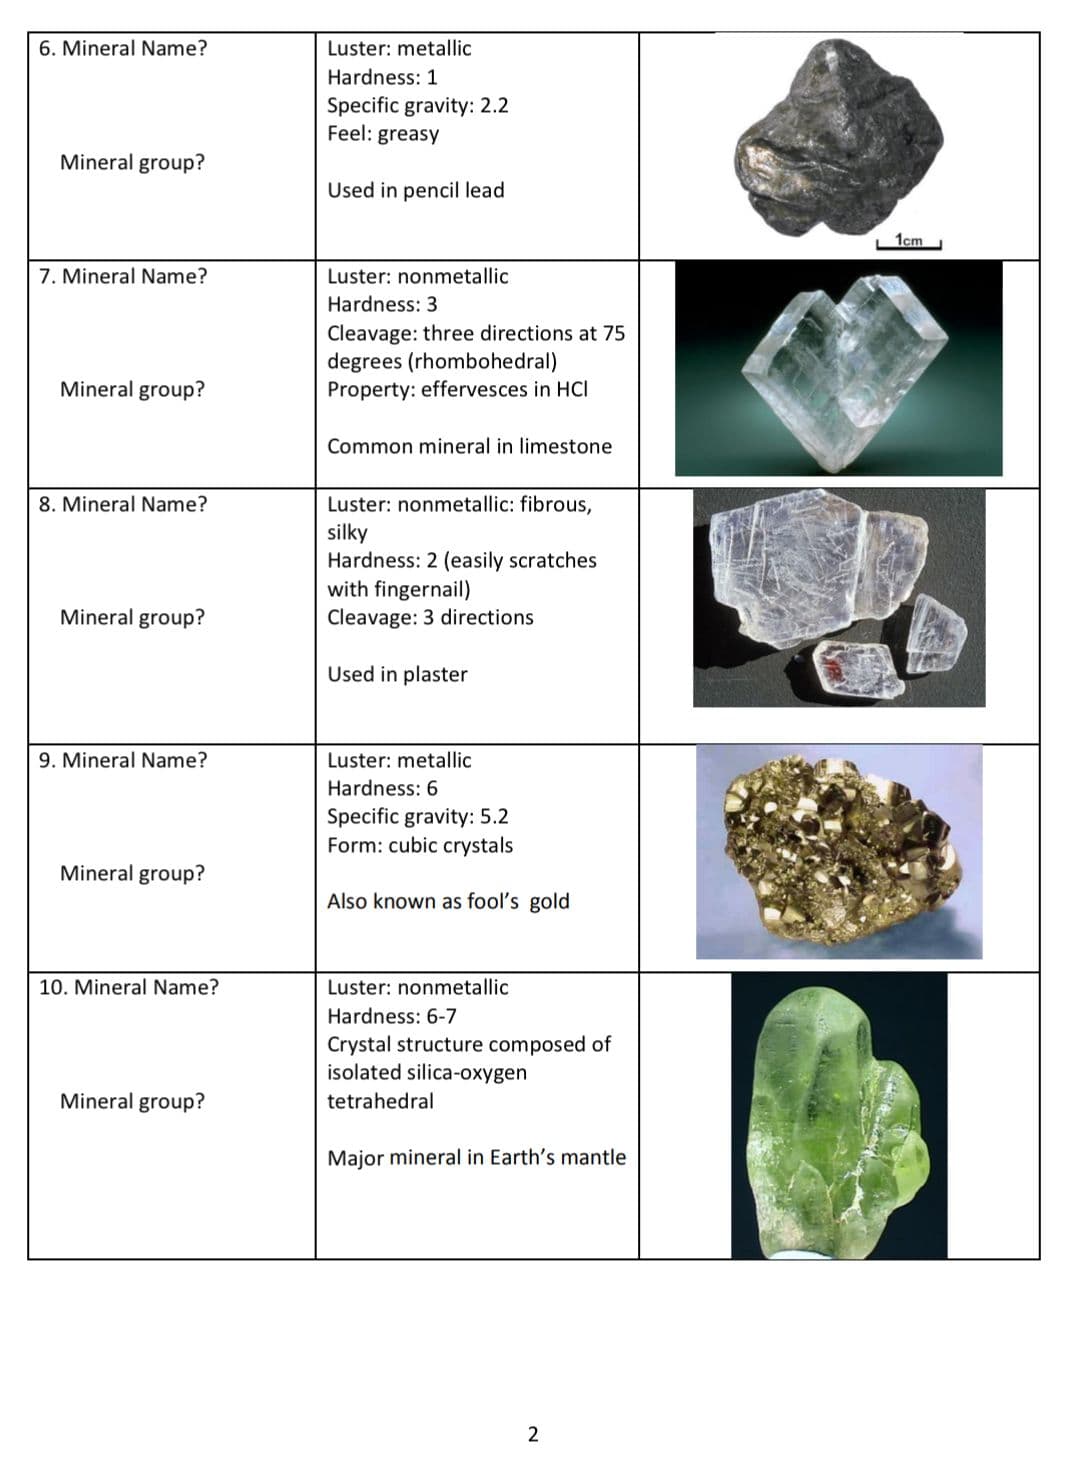 6. Mineral Name?
Mineral group?
7. Mineral Name?
Mineral group?
8. Mineral Name?
Mineral group?
9. Mineral Name?
Mineral group?
10. Mineral Name?
Mineral group?
Luster: metallic
Hardness: 1
Specific gravity: 2.2
Feel: greasy
Used in pencil lead
Luster: nonmetallic
Hardness: 3
Cleavage: three directions at 75
degrees (rhombohedral)
Property: effervesces in HCI
Common mineral in limestone
Luster: nonmetallic: fibrous,
silky
Hardness: 2 (easily scratches
with fingernail)
Cleavage: 3 directions
Used in plaster
Luster: metallic
Hardness: 6
Specific gravity: 5.2
Form: cubic crystals
Also known as fool's gold
Luster: nonmetallic
Hardness: 6-7
Crystal structure composed of
isolated silica-oxygen
tetrahedral
Major mineral in Earth's mantle
2
1cm